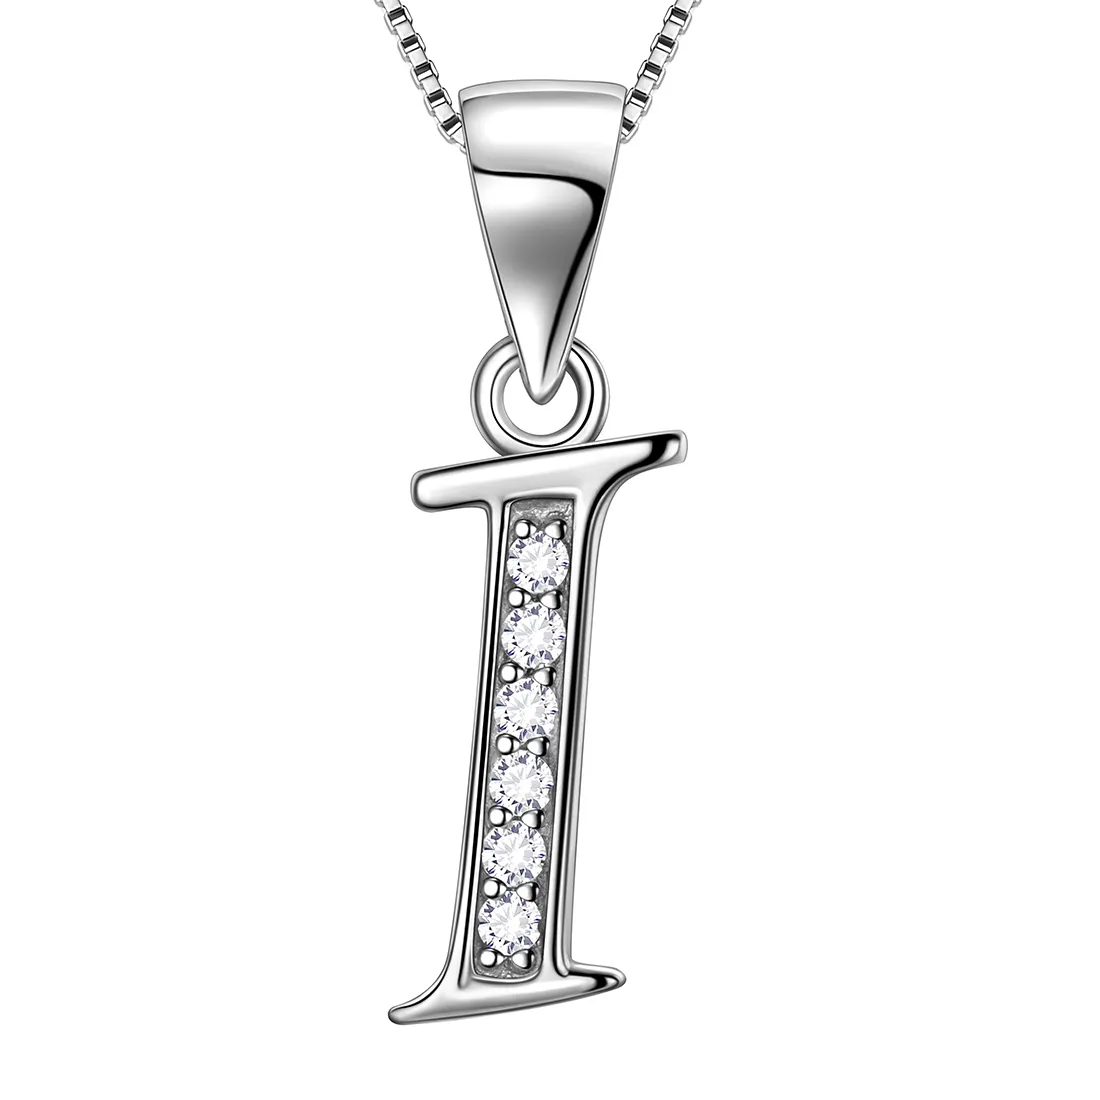 Hot selling 925 sterling silver letter pendant A-Z necklace women jewelry